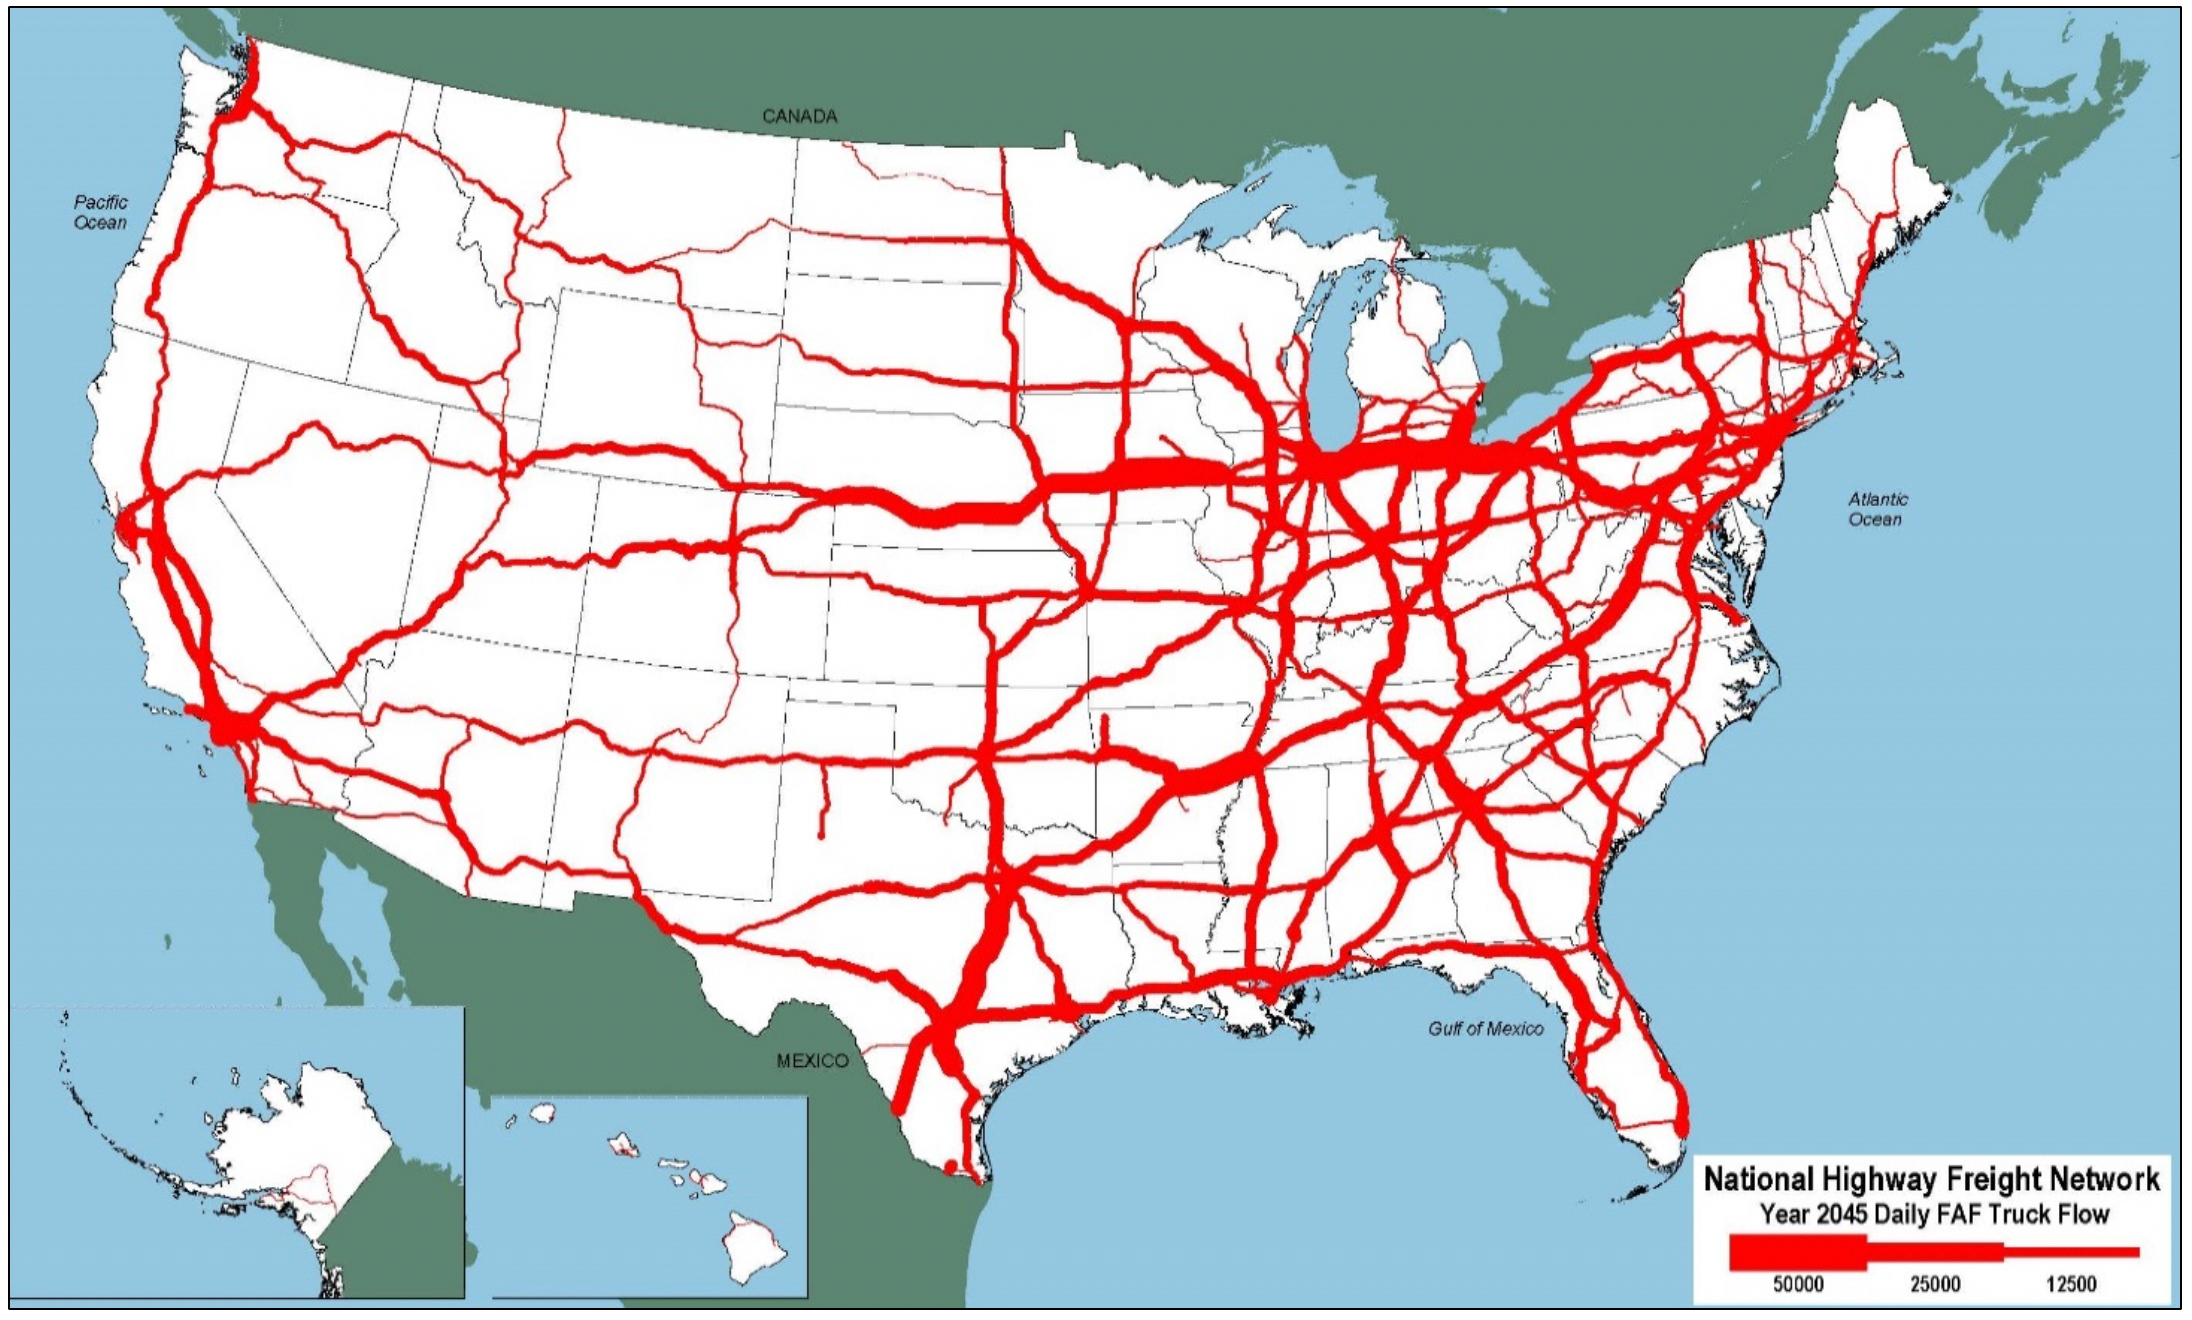 An outline map of the 48 contiguous States and insets for Alaska and Hawaii show projected long haul truck flows per day on the NHFN in 2045. Truck volume is indicated by line thickness for 60,000 trucks per day, 25,000 trucks per day, and 12,500 trucks per day. Truck volume is projected to increase overall across all Interstates. The heaviest volume is projected to remain the region that includes the East Coast and Midwest States, as well as southern States and California. 